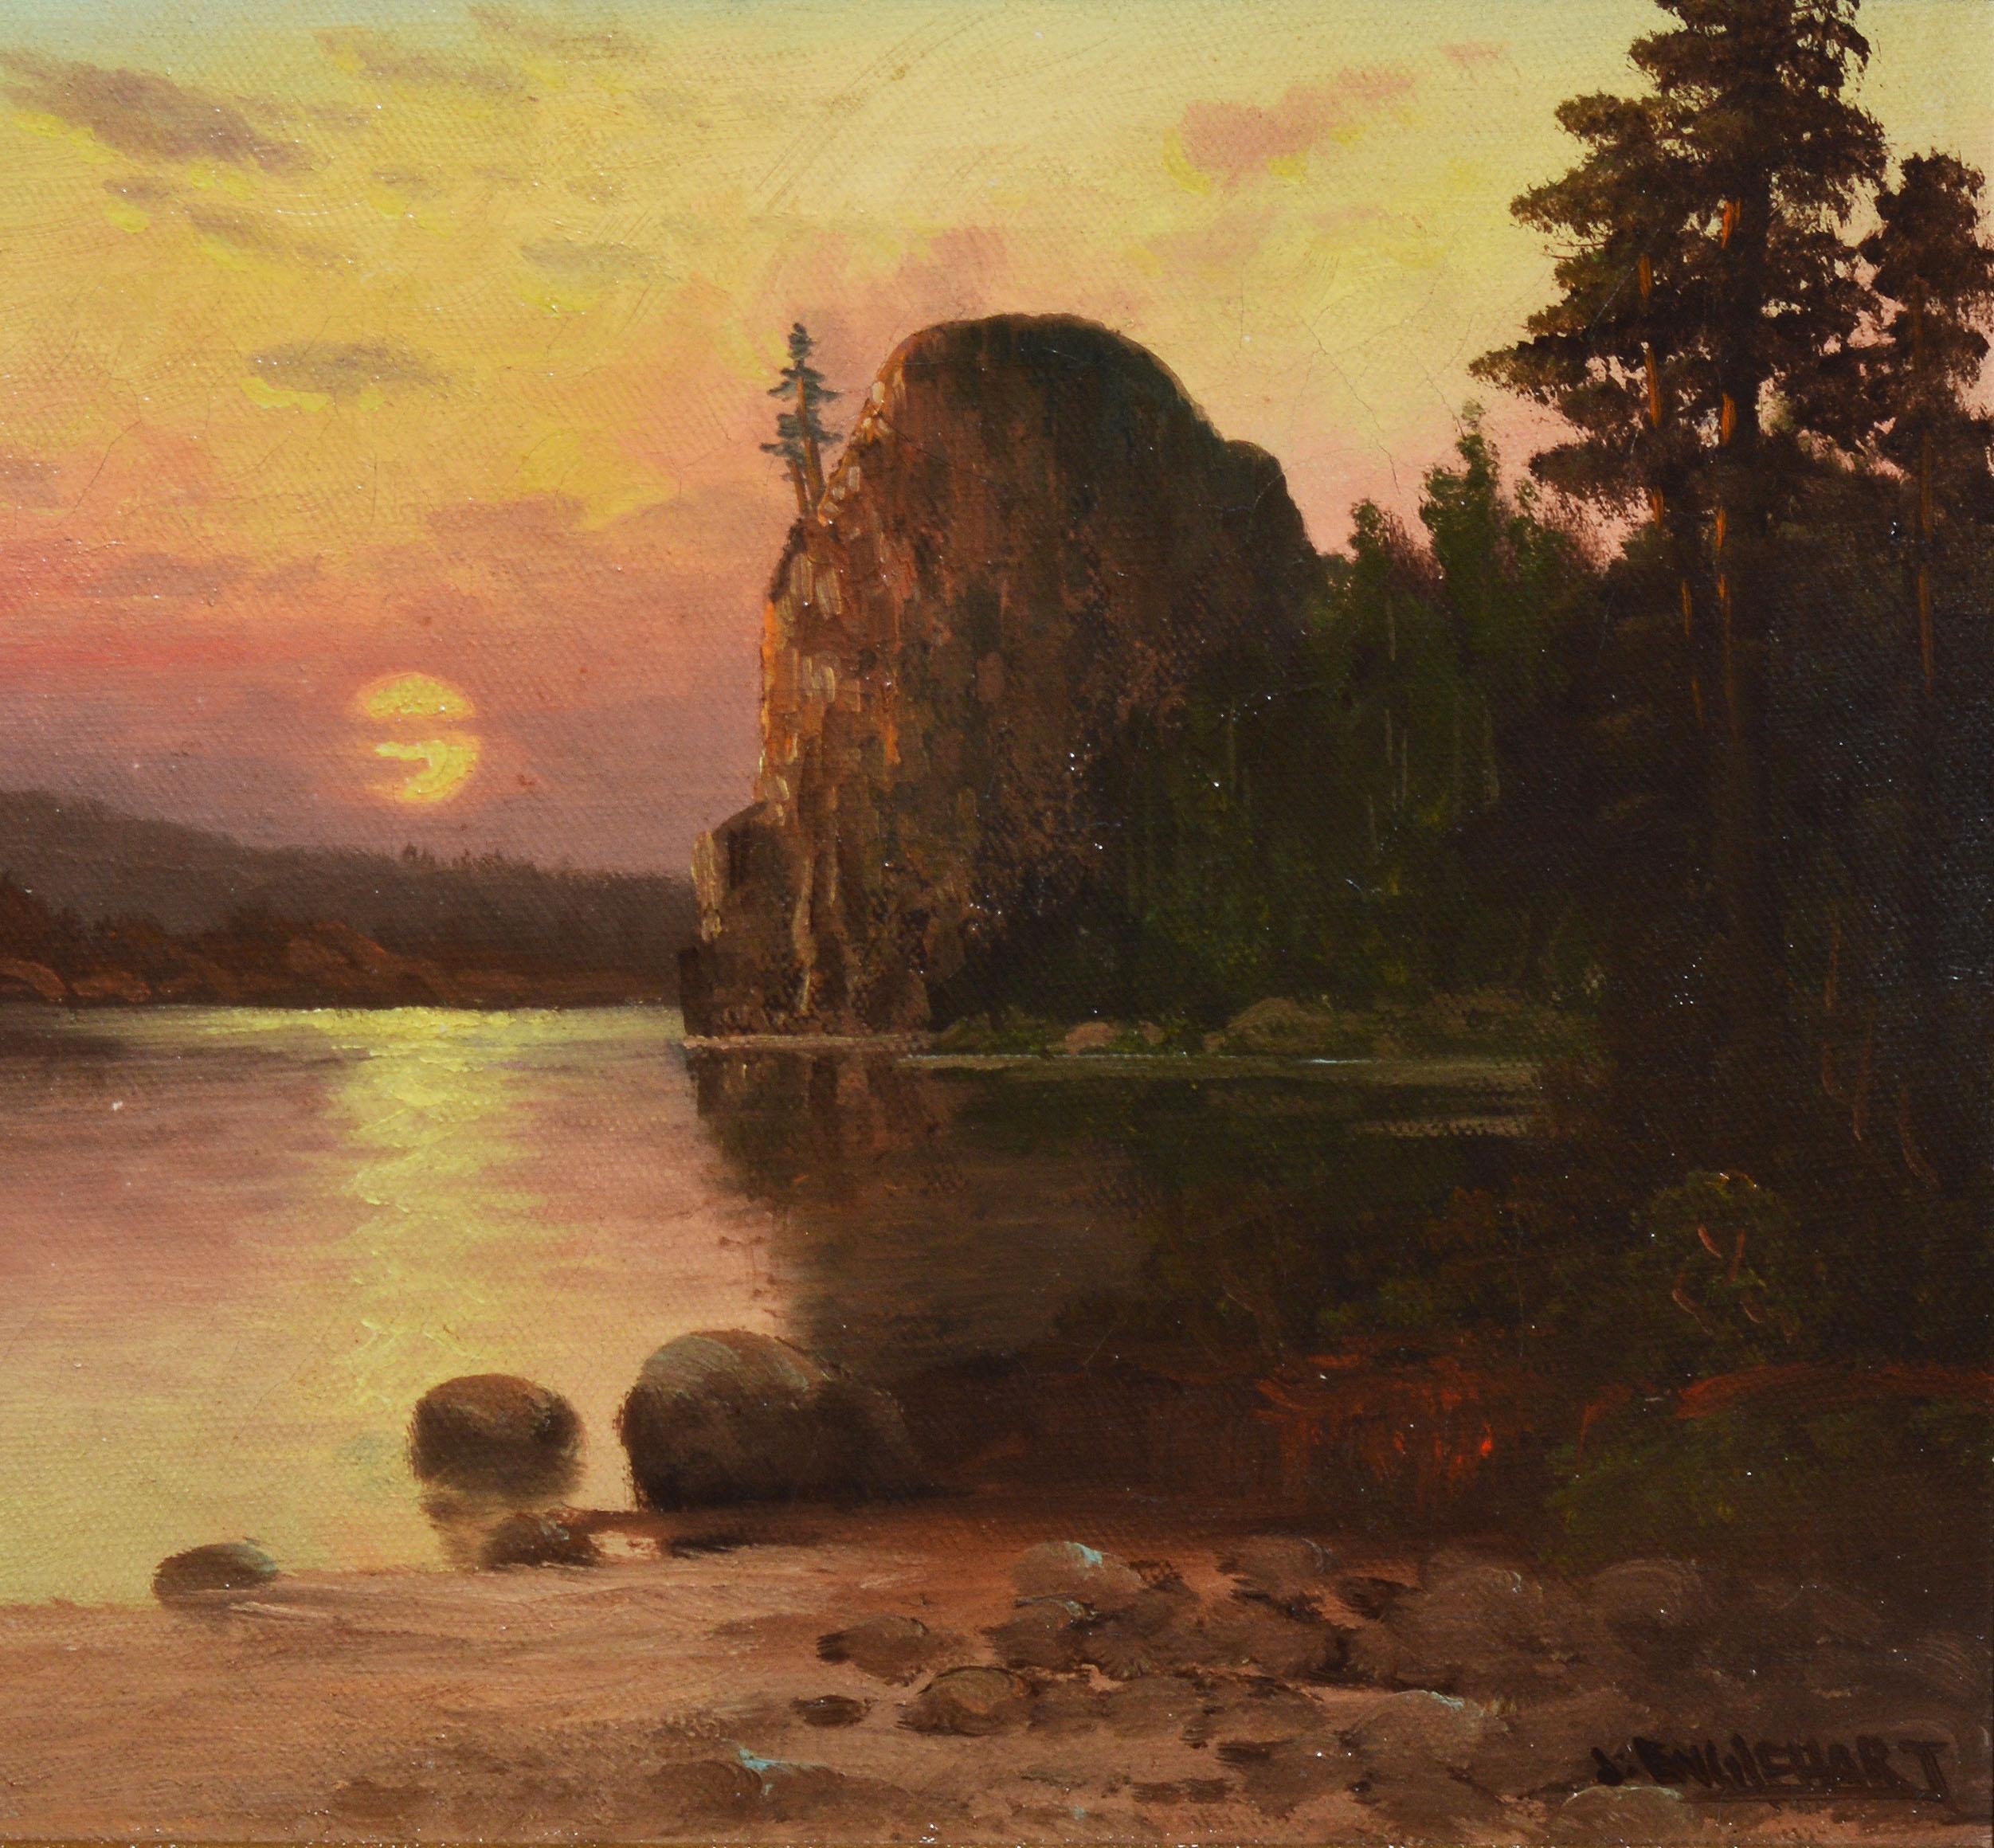 Antique western sunset landscape oil painting by John Englehart  (1867 - 1915).  Oil on canvas, circa 1880.  Signed.  Displayed in a giltwood frame.  Image, 14